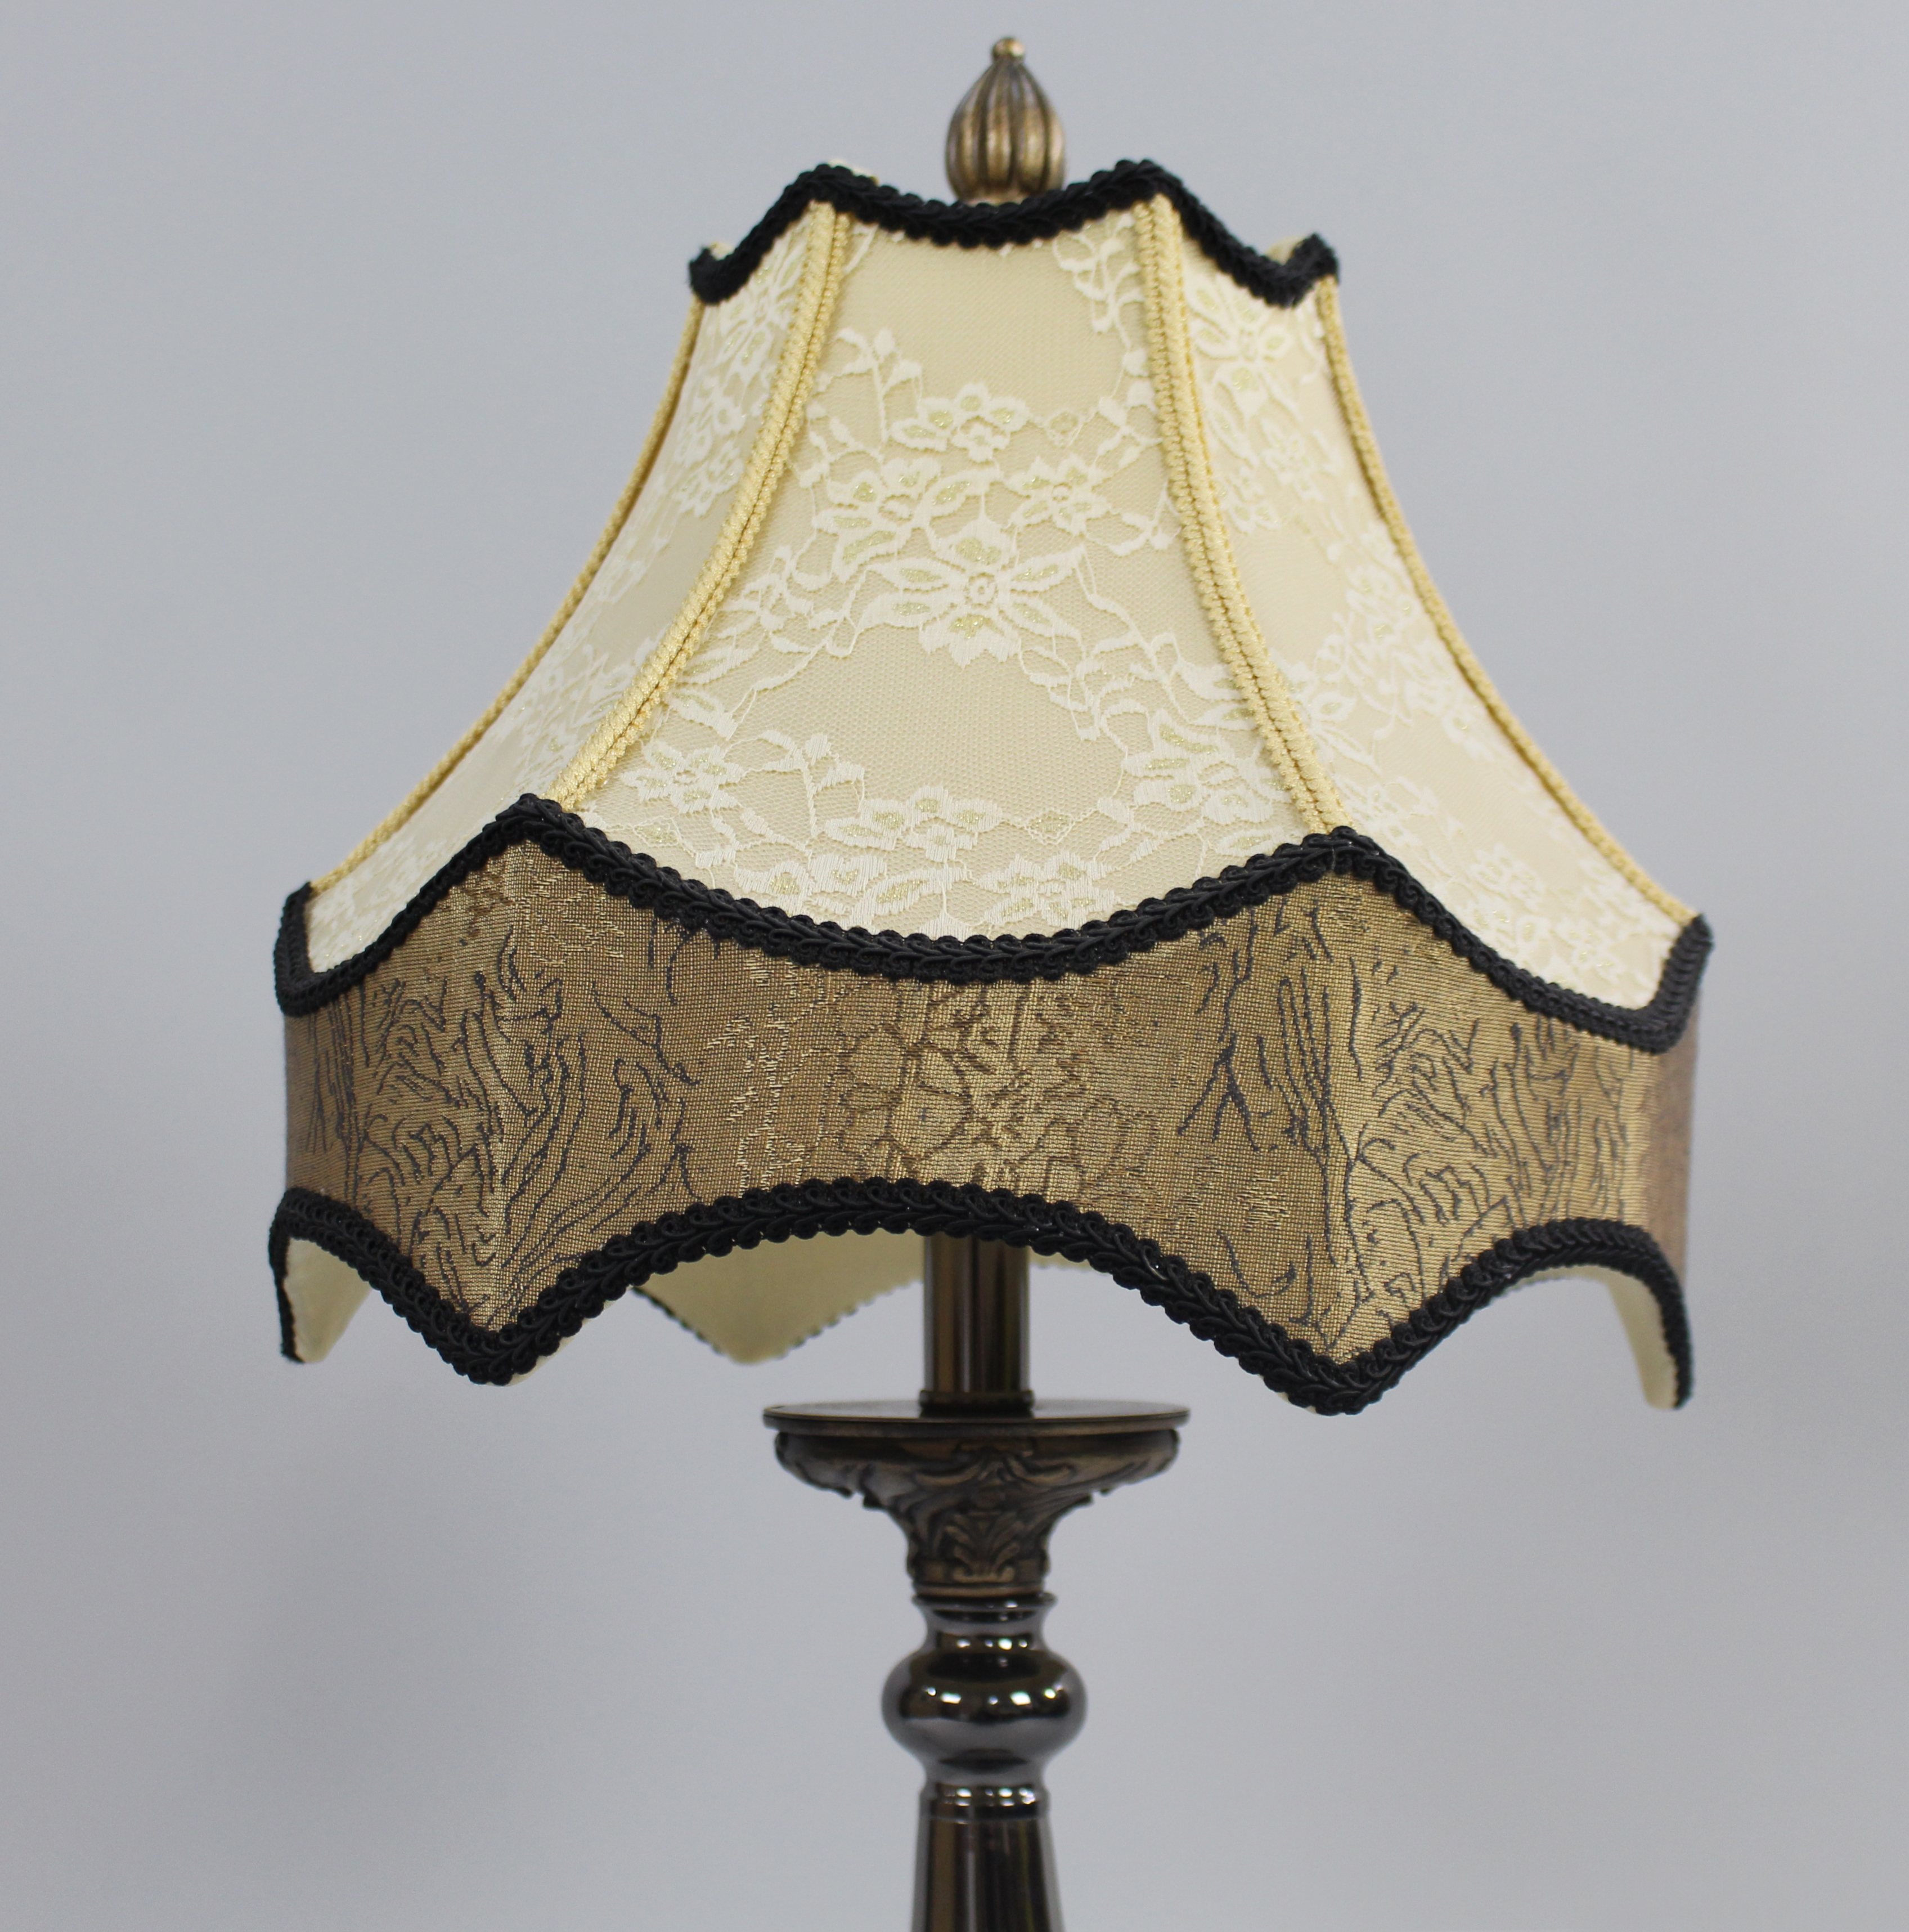 Decorative Table Lamp with Shade - Image 4 of 4